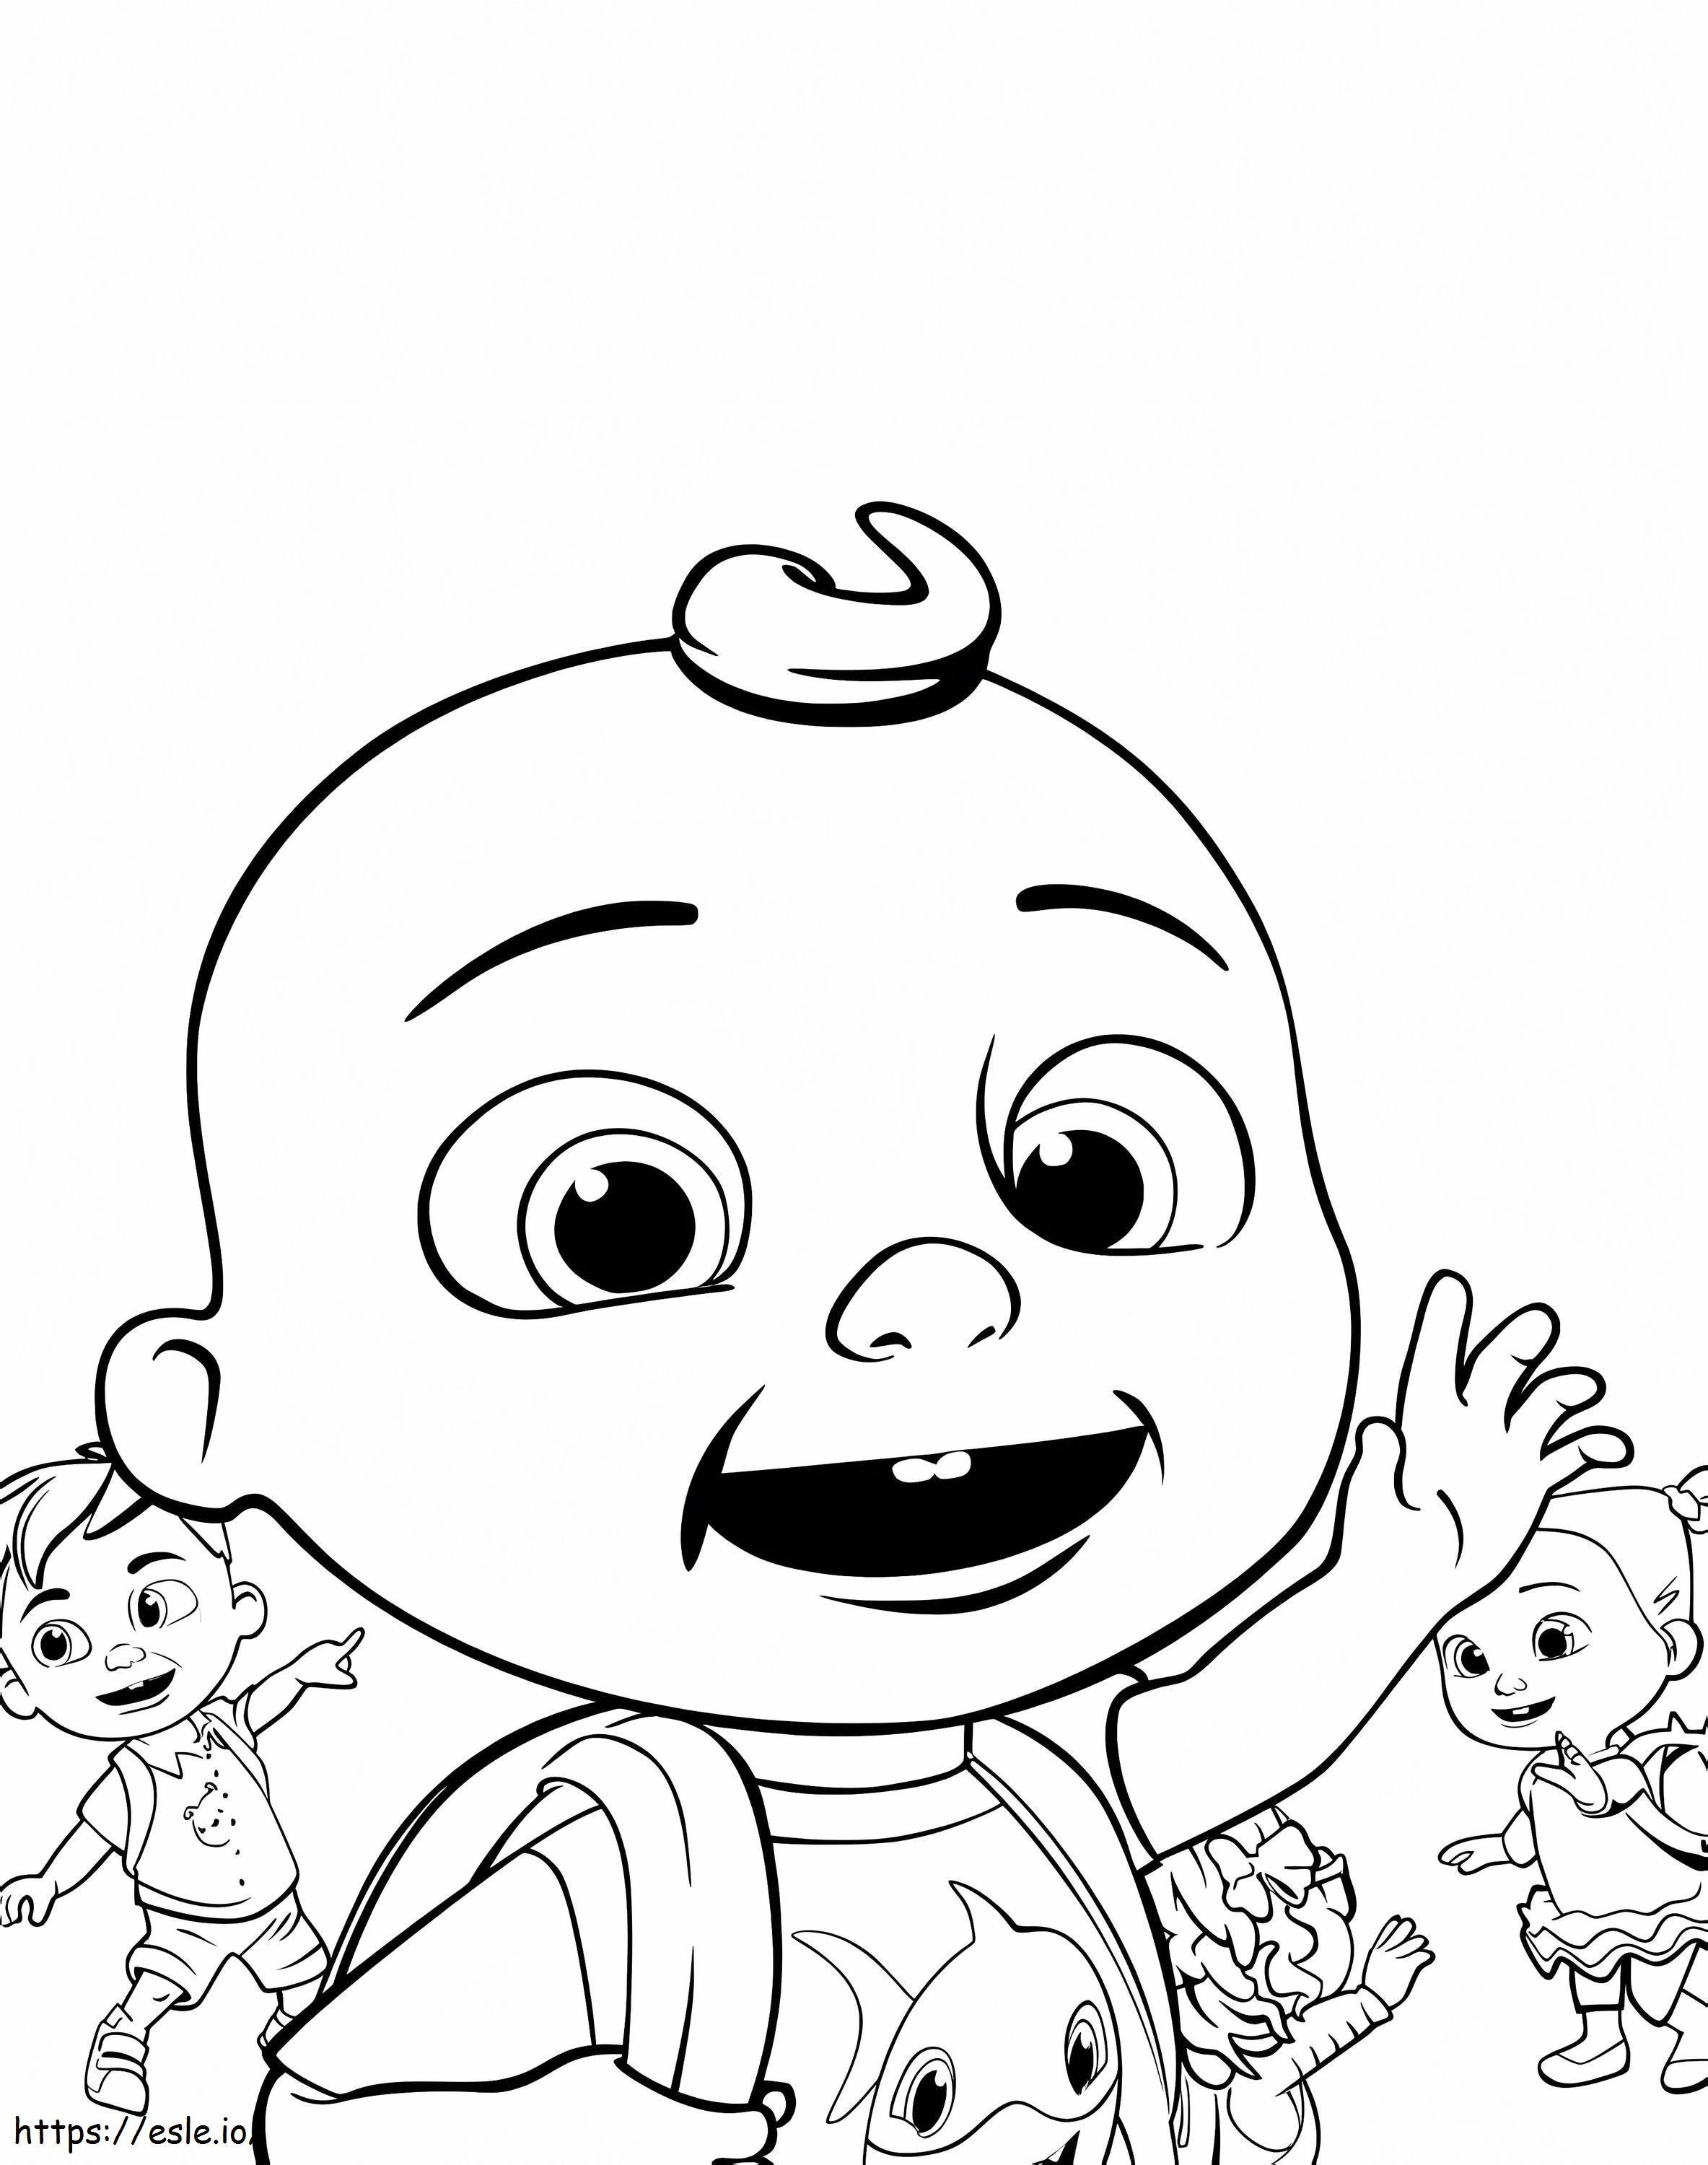 Johnny And Friends 1 coloring page